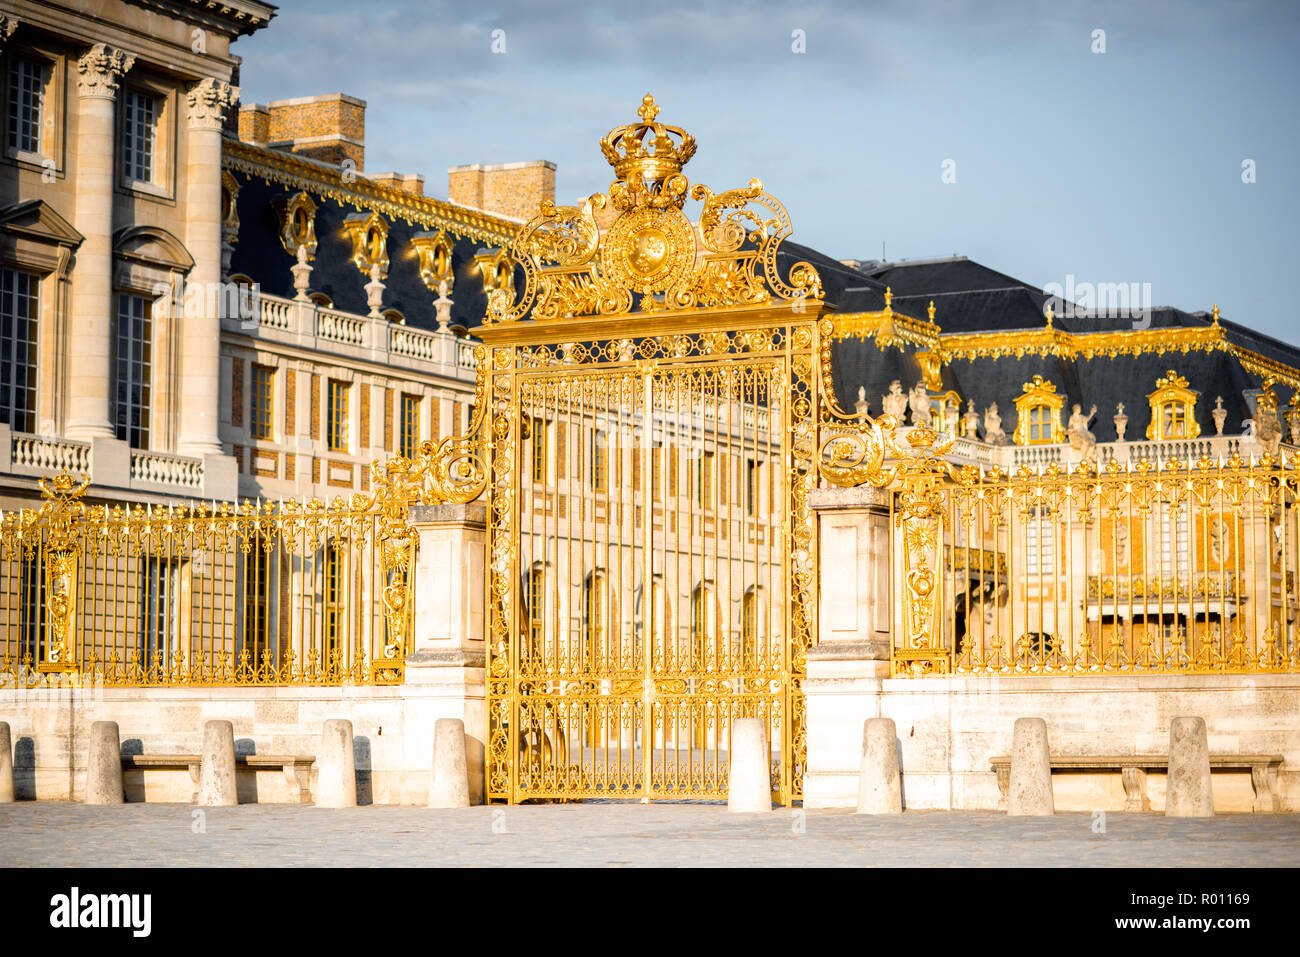 The golden gate of the palace of Versailles in France Stock Photo